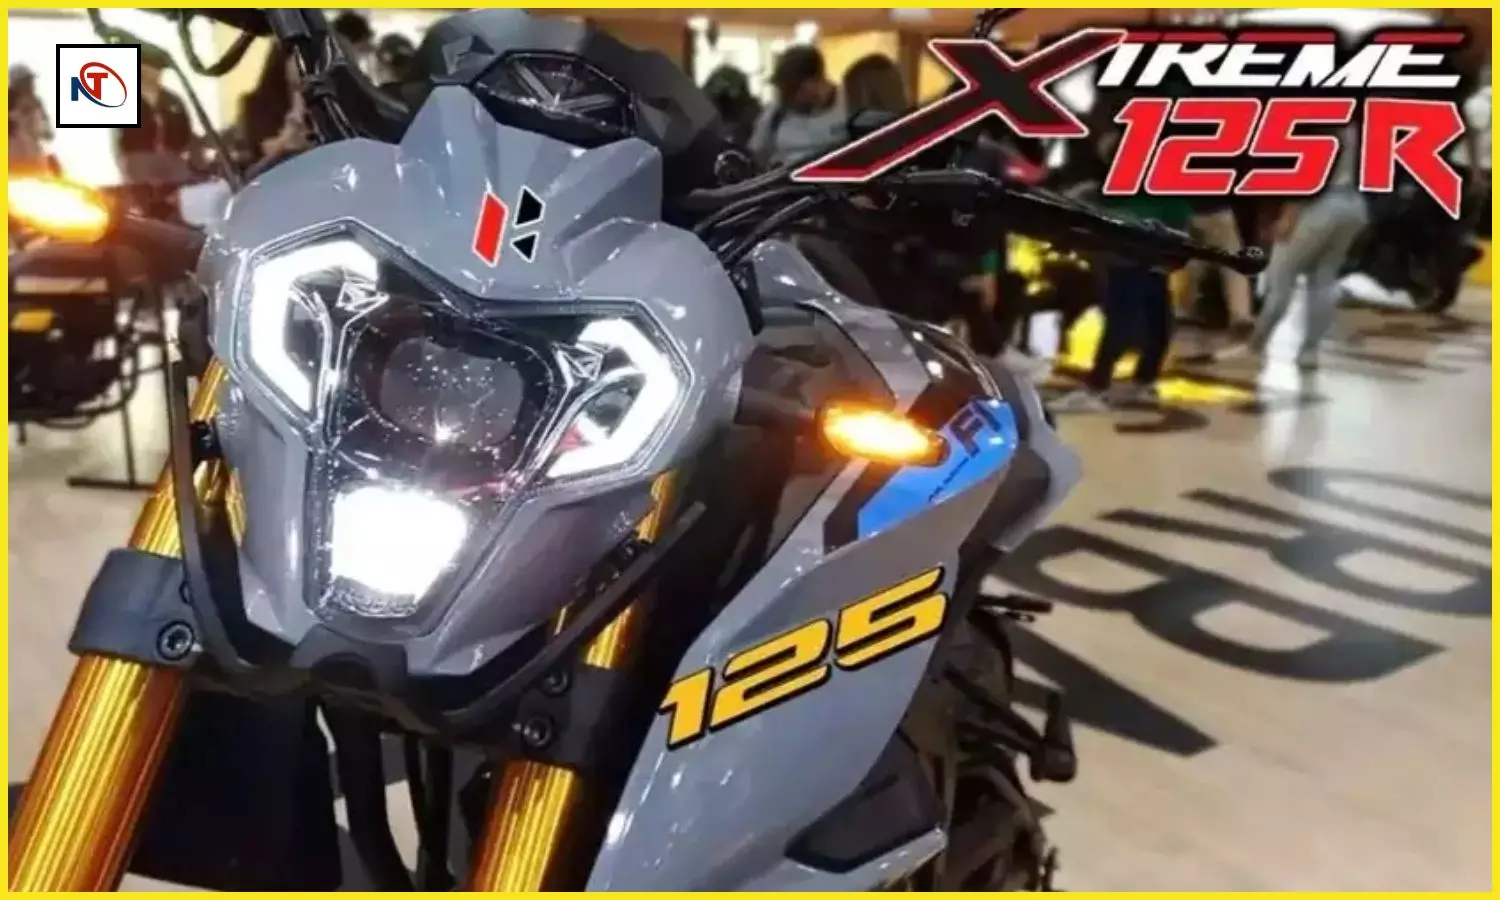 Hero Xtreme 125R On Road Price and Features